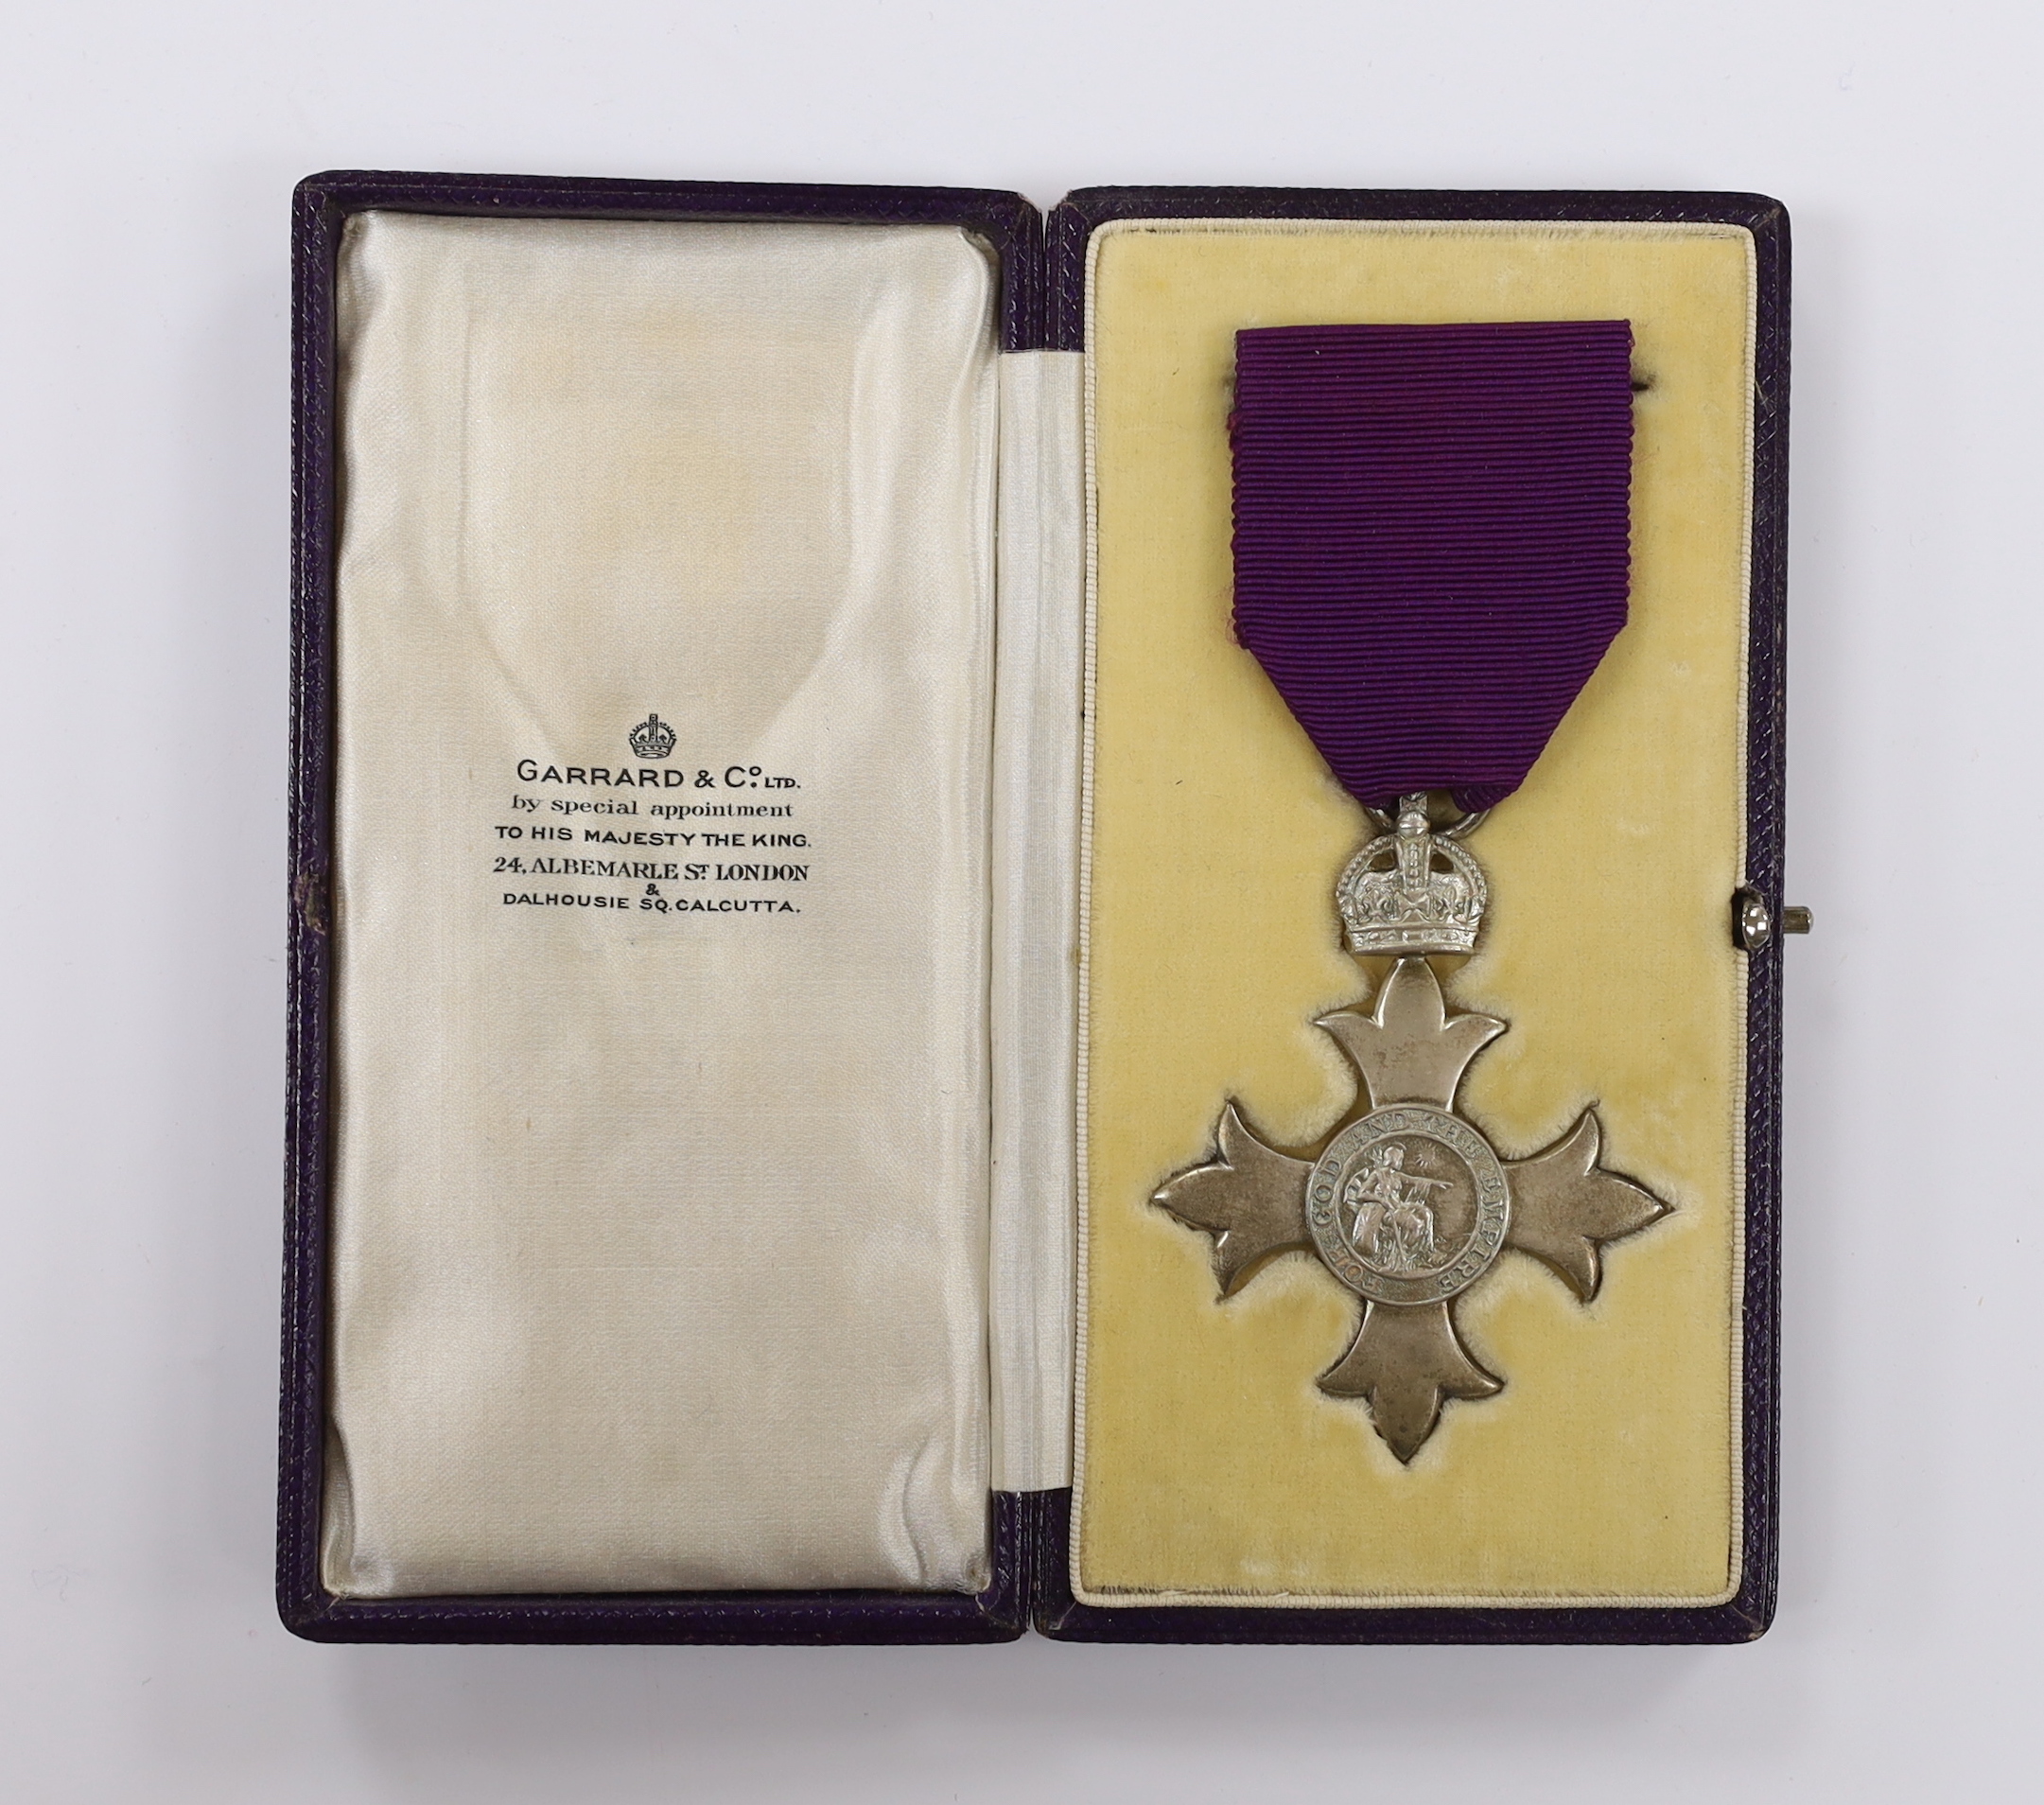 A cased George V Civil MBE, awarded in 1918 to M.F.W. Bunney (1873-1927) for architectural services in Scotland during the First World War